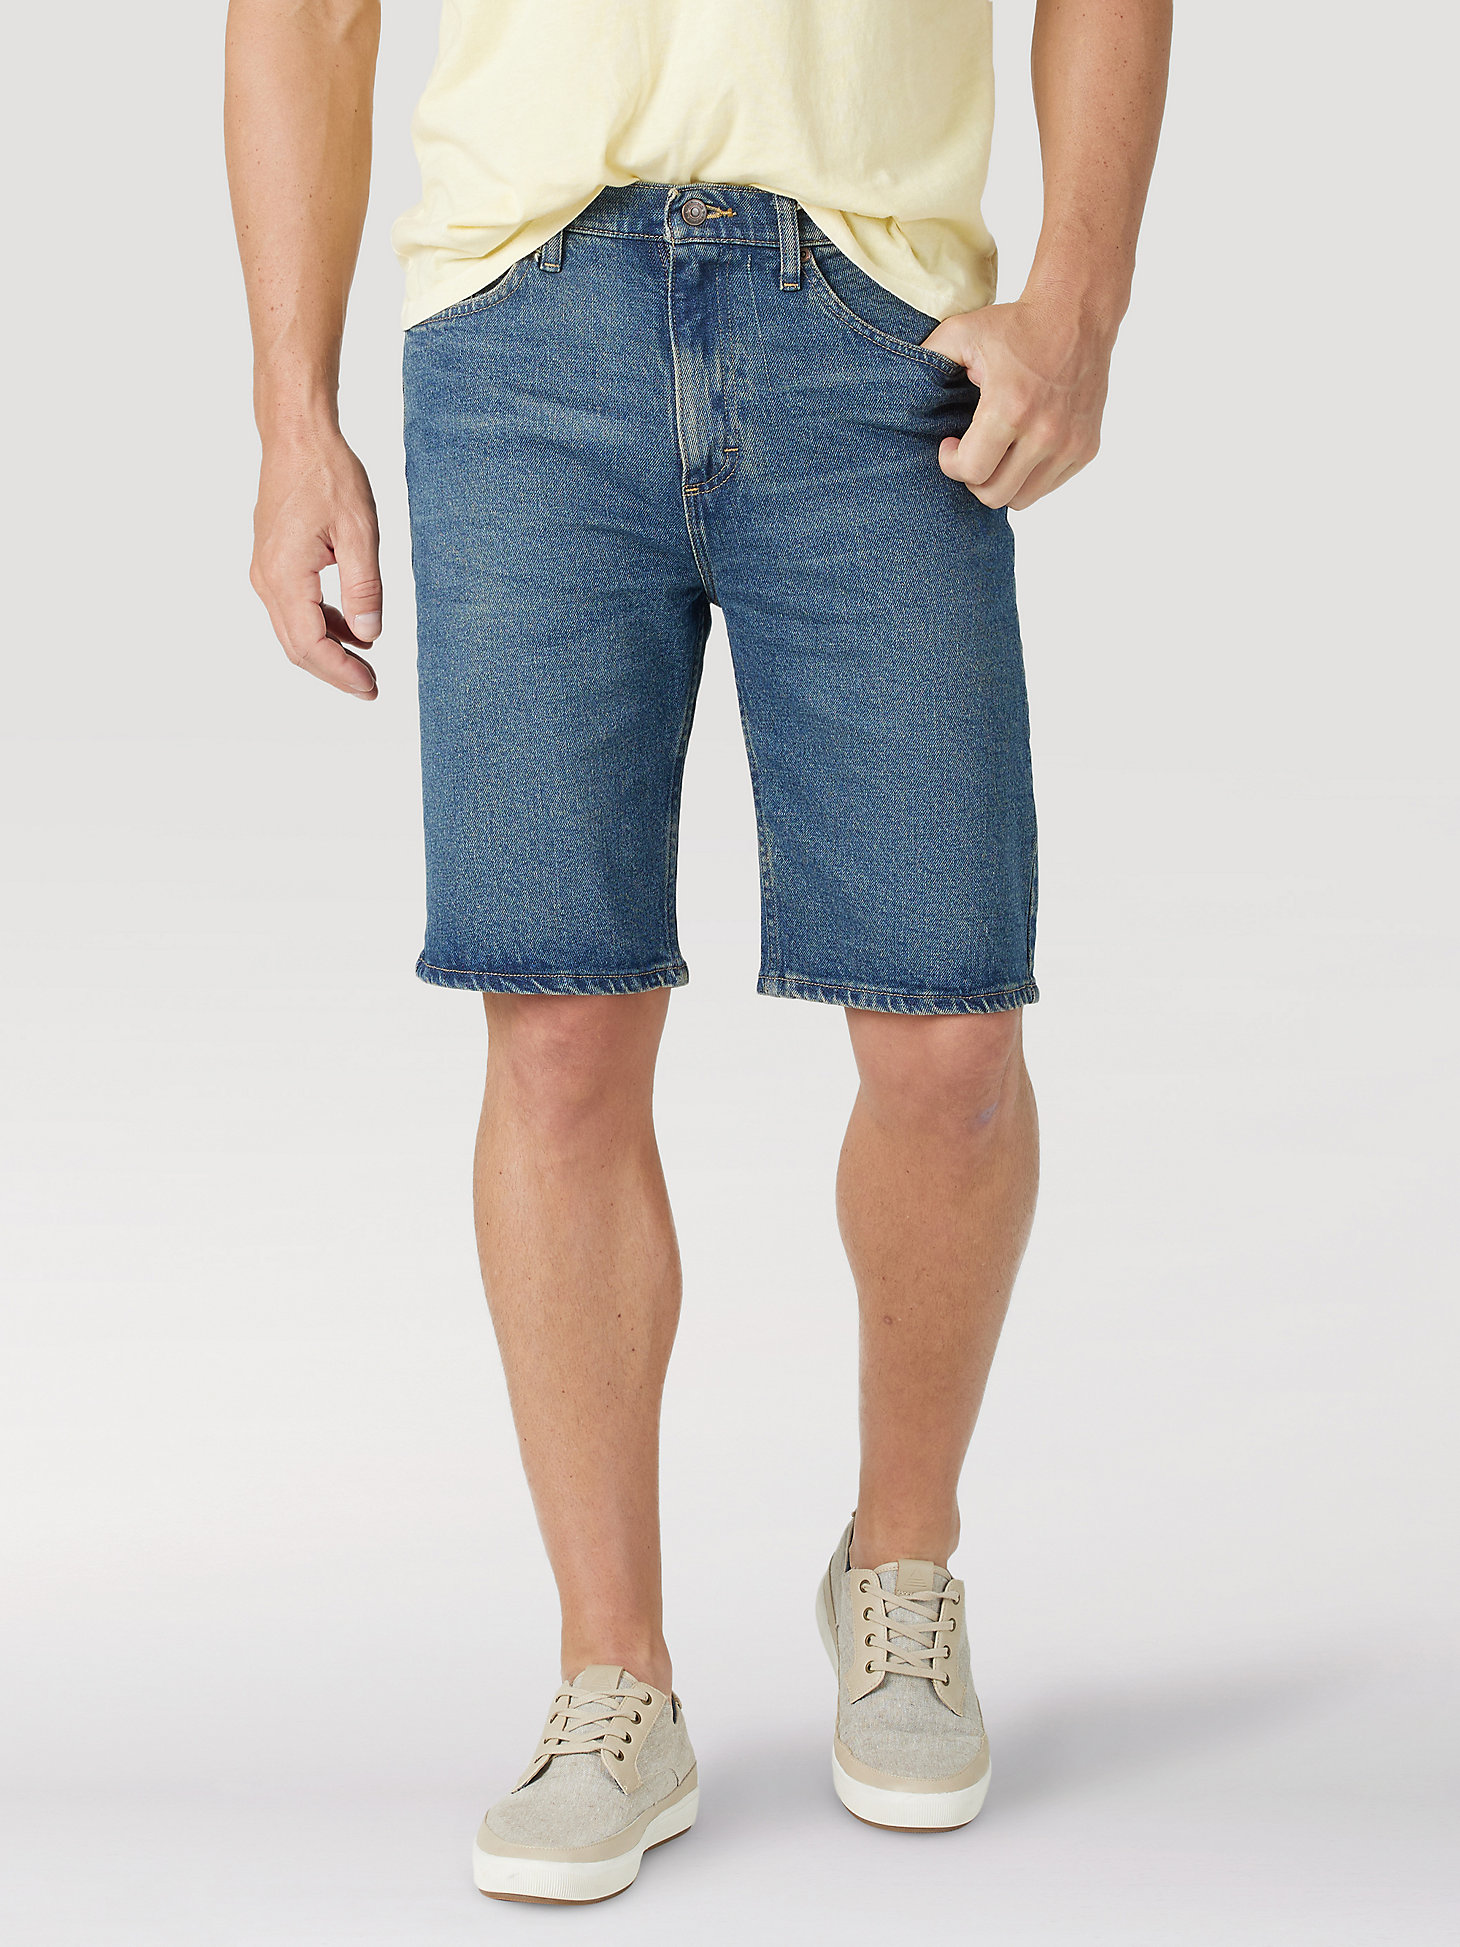 O1-1 NEW Men's DNM Collection Cotton Ripped Denim Shorts 